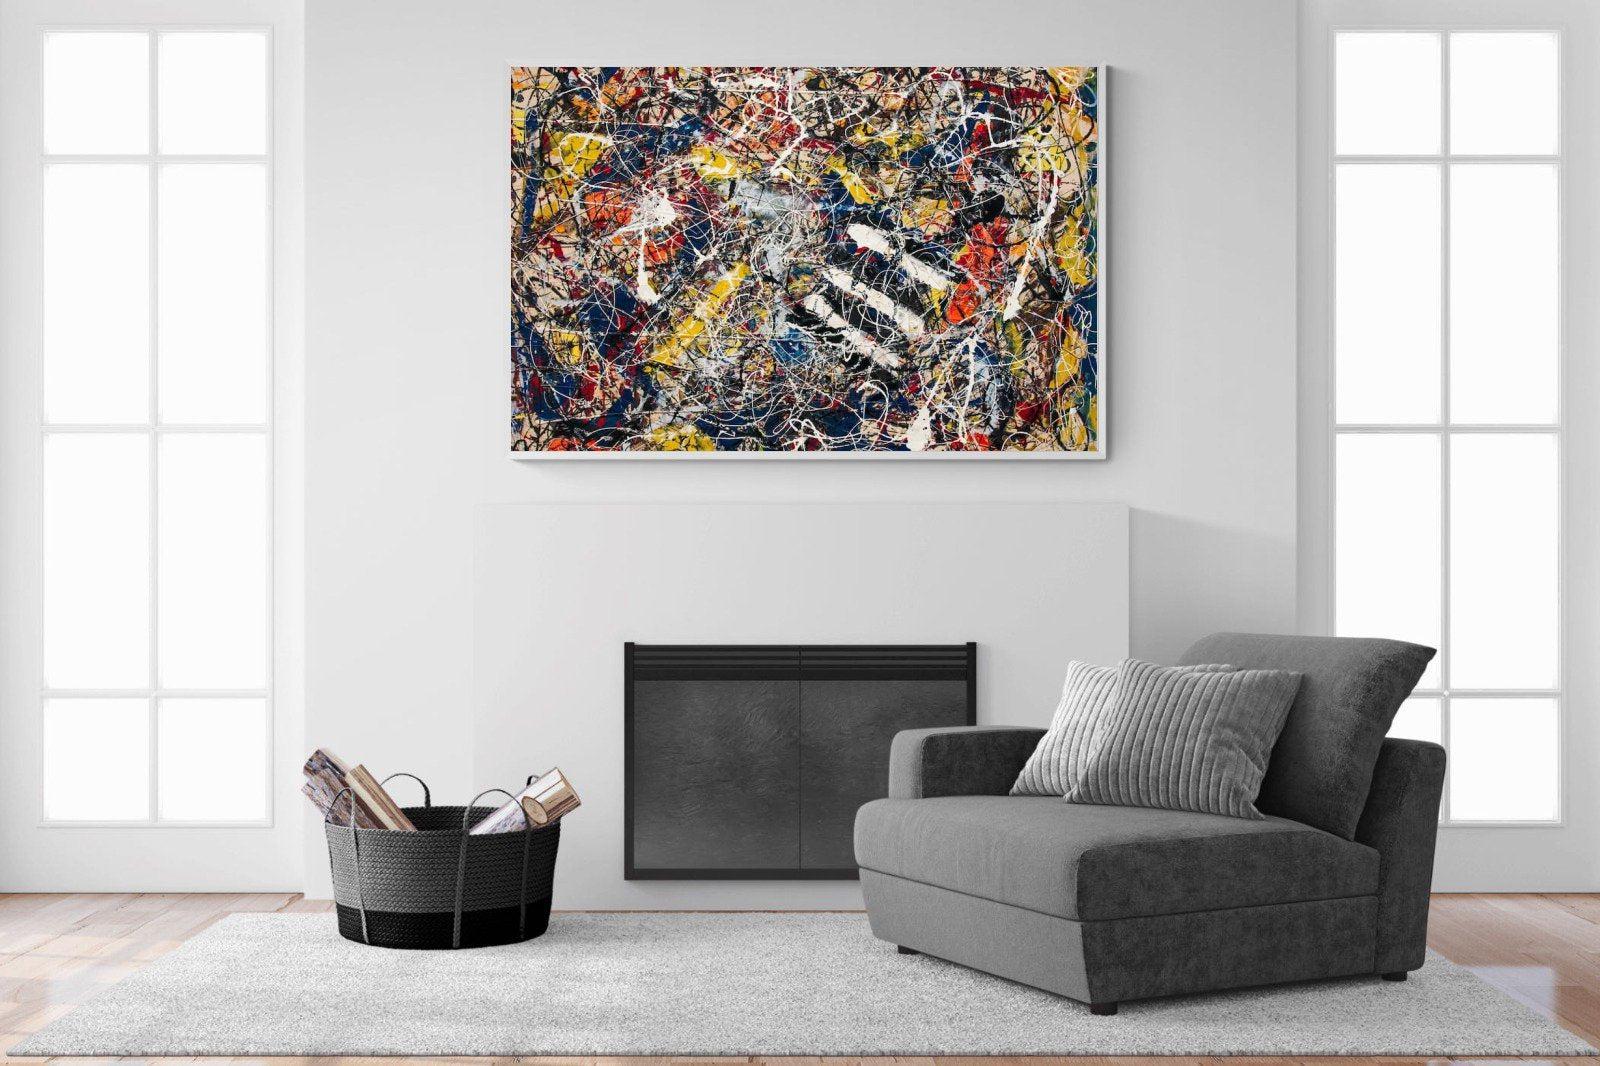 Number-17A-Wall_Art-150 x 100cm-Mounted Canvas-White-Pixalot